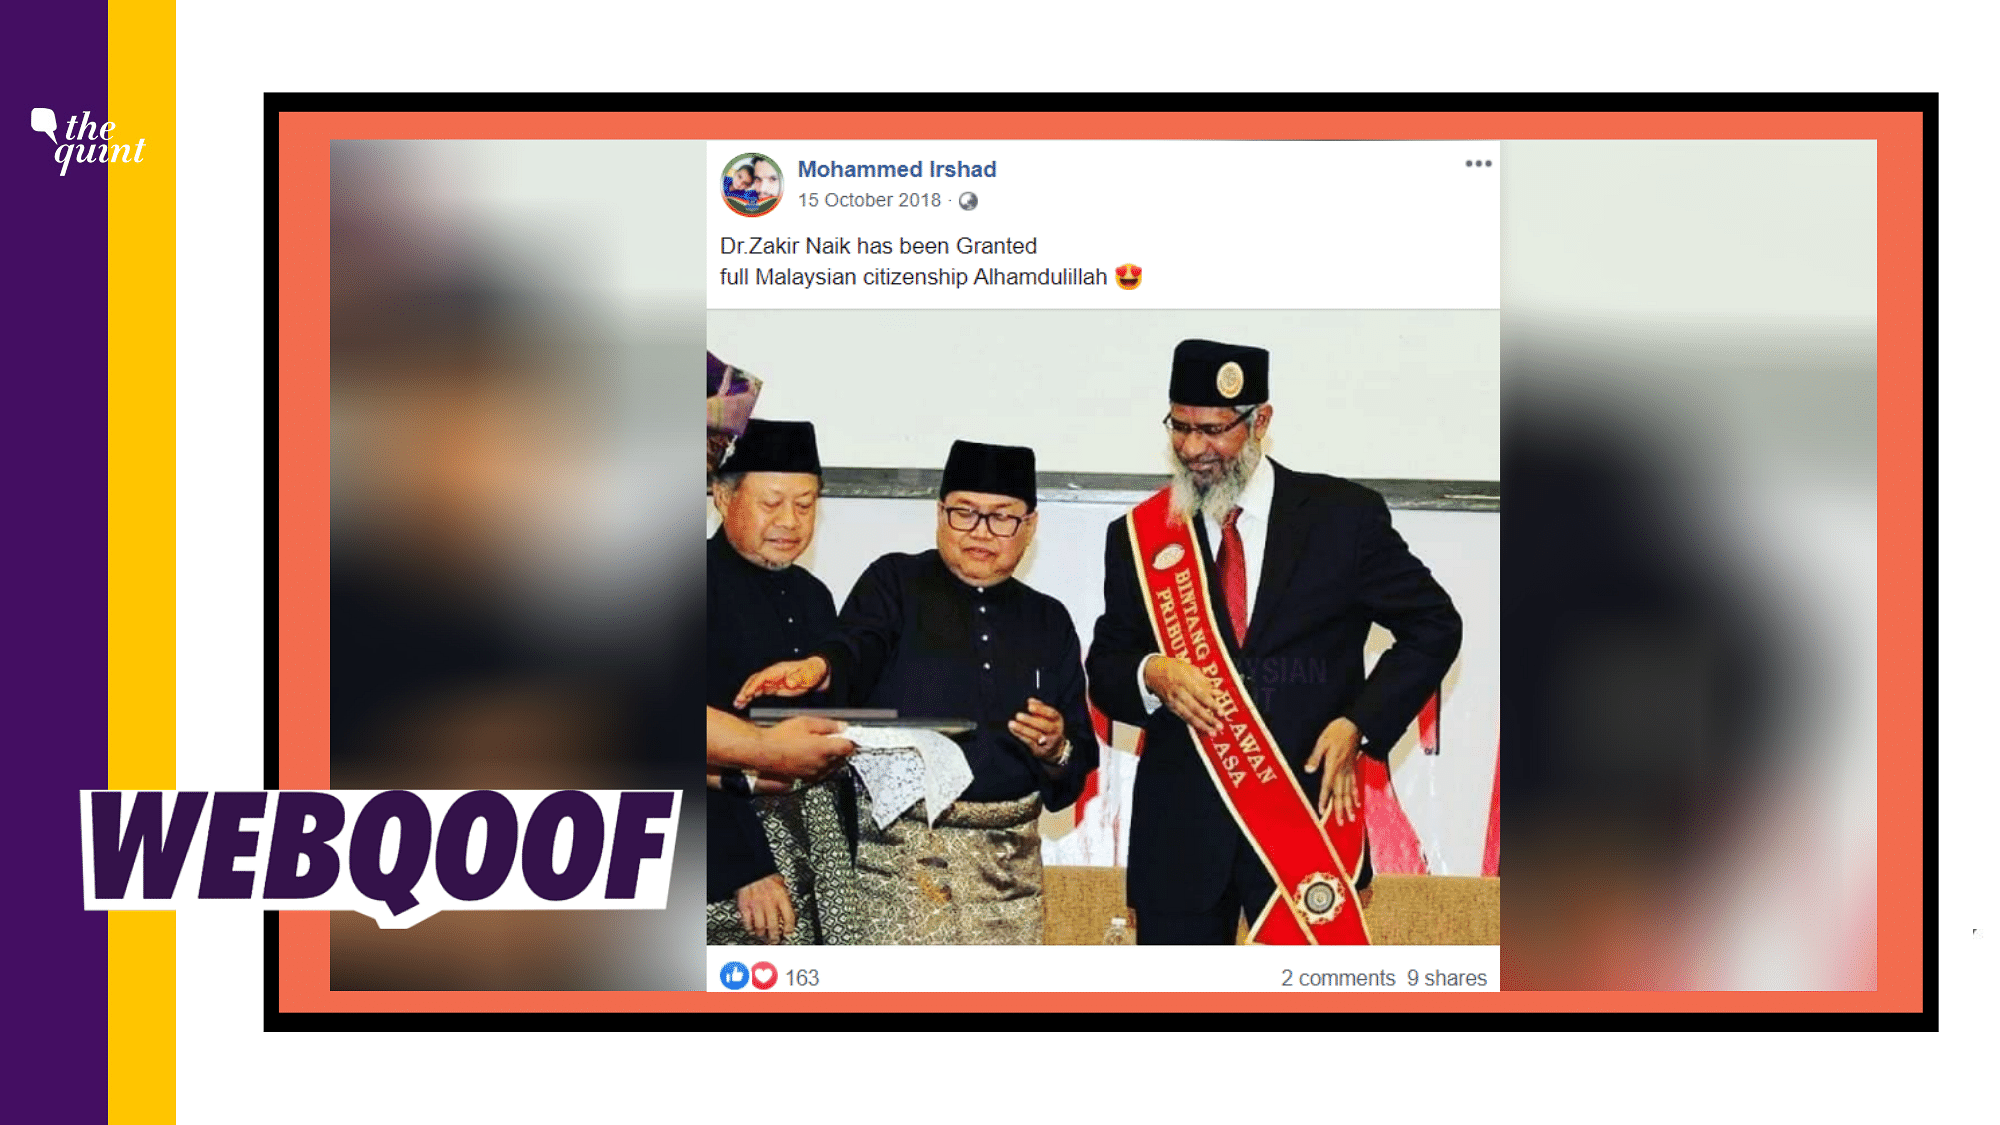 Several social media users have shared a picture of Islamic televangelist Zakir Naik getting awarded, with the claim that he has been granted citizenship in Malaysia.